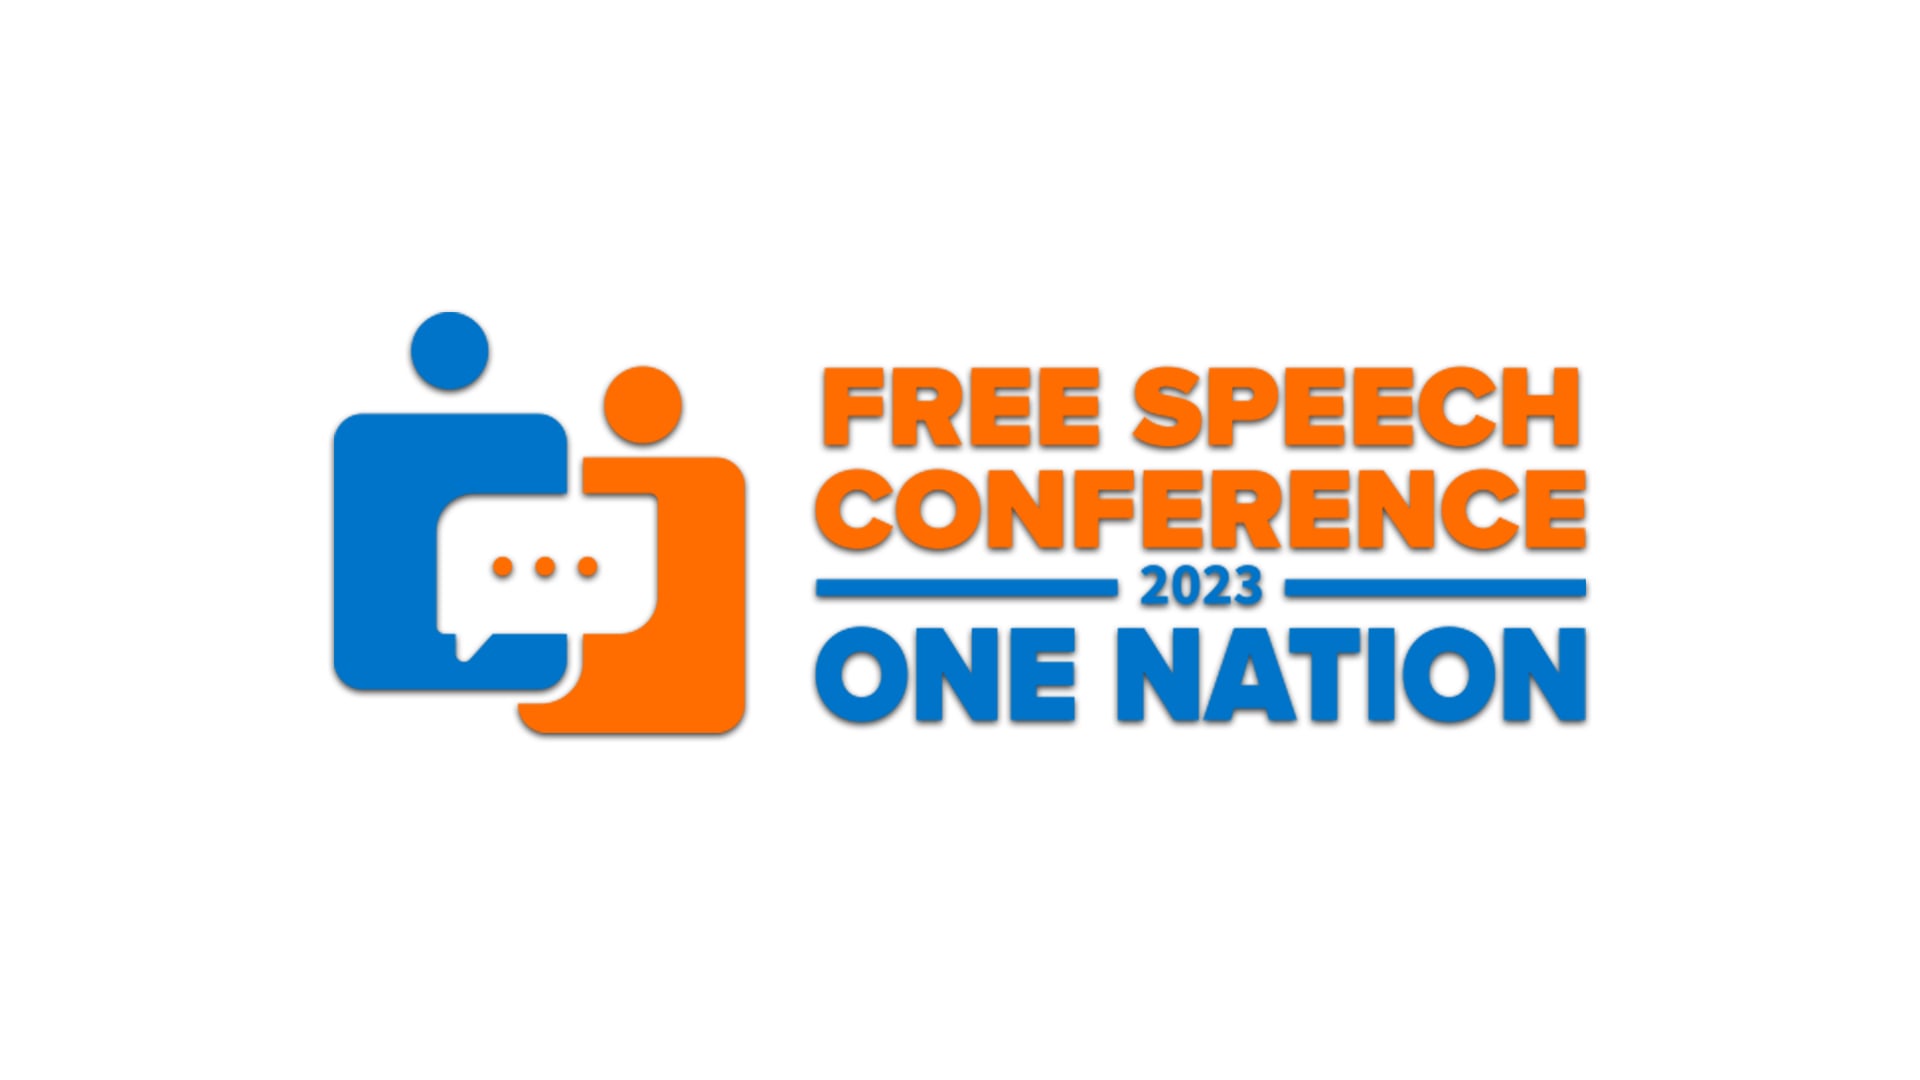 FREE SPEECH CONFERENCE 2023